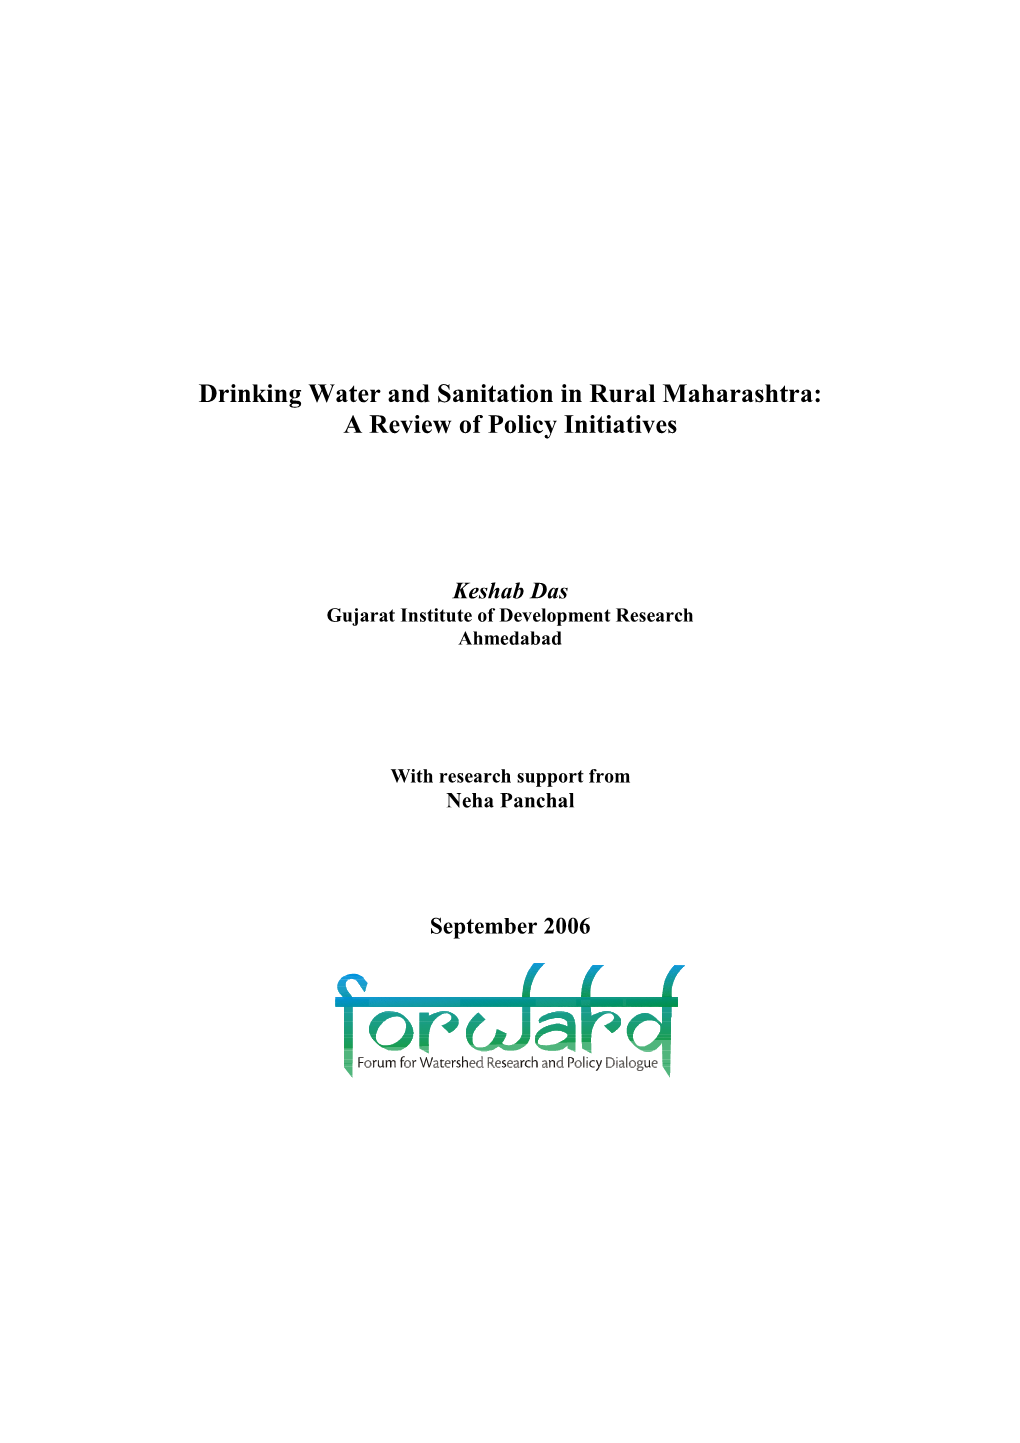 Drinking Water and Sanitation in Rural Maharashtra: a Review of Policy Initiatives